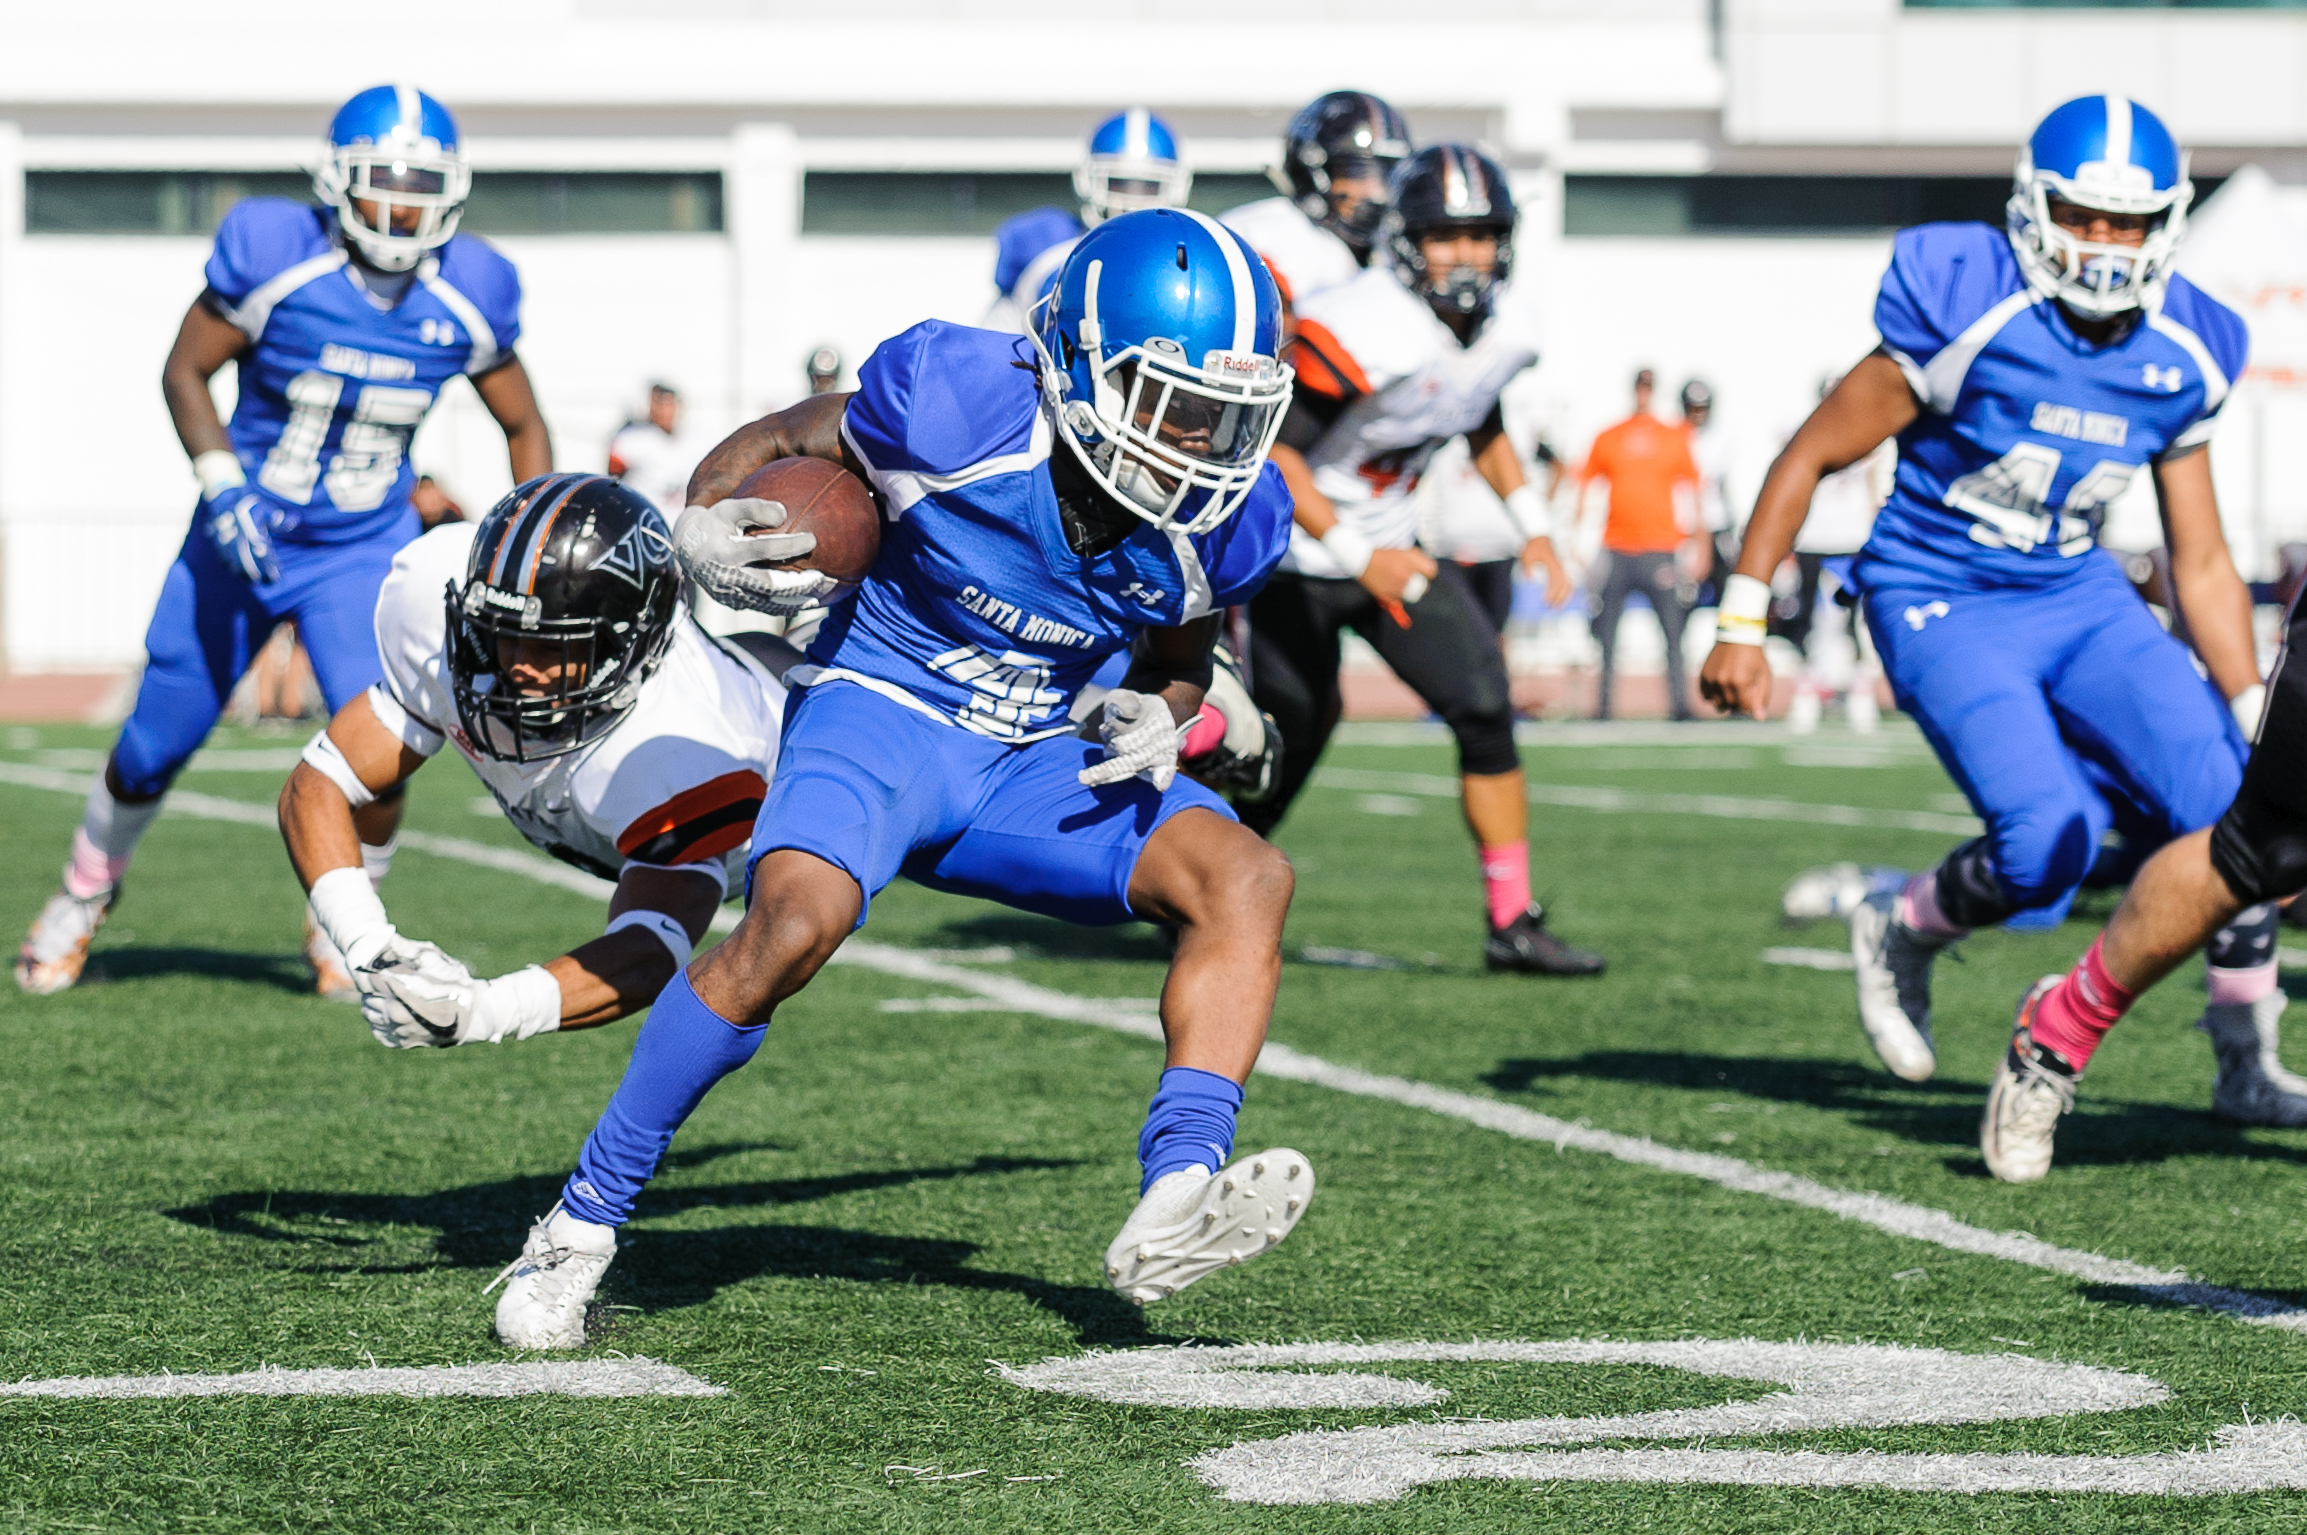  Wide receiver Cristian Franklin (4) of Santa Monica College evades  the Ventura College defense to gain yardage on the play. The Santa Monica College Corsairs lose to the Ventura College Pirates 0-55. The game was held at the Corsair Stadium at the 